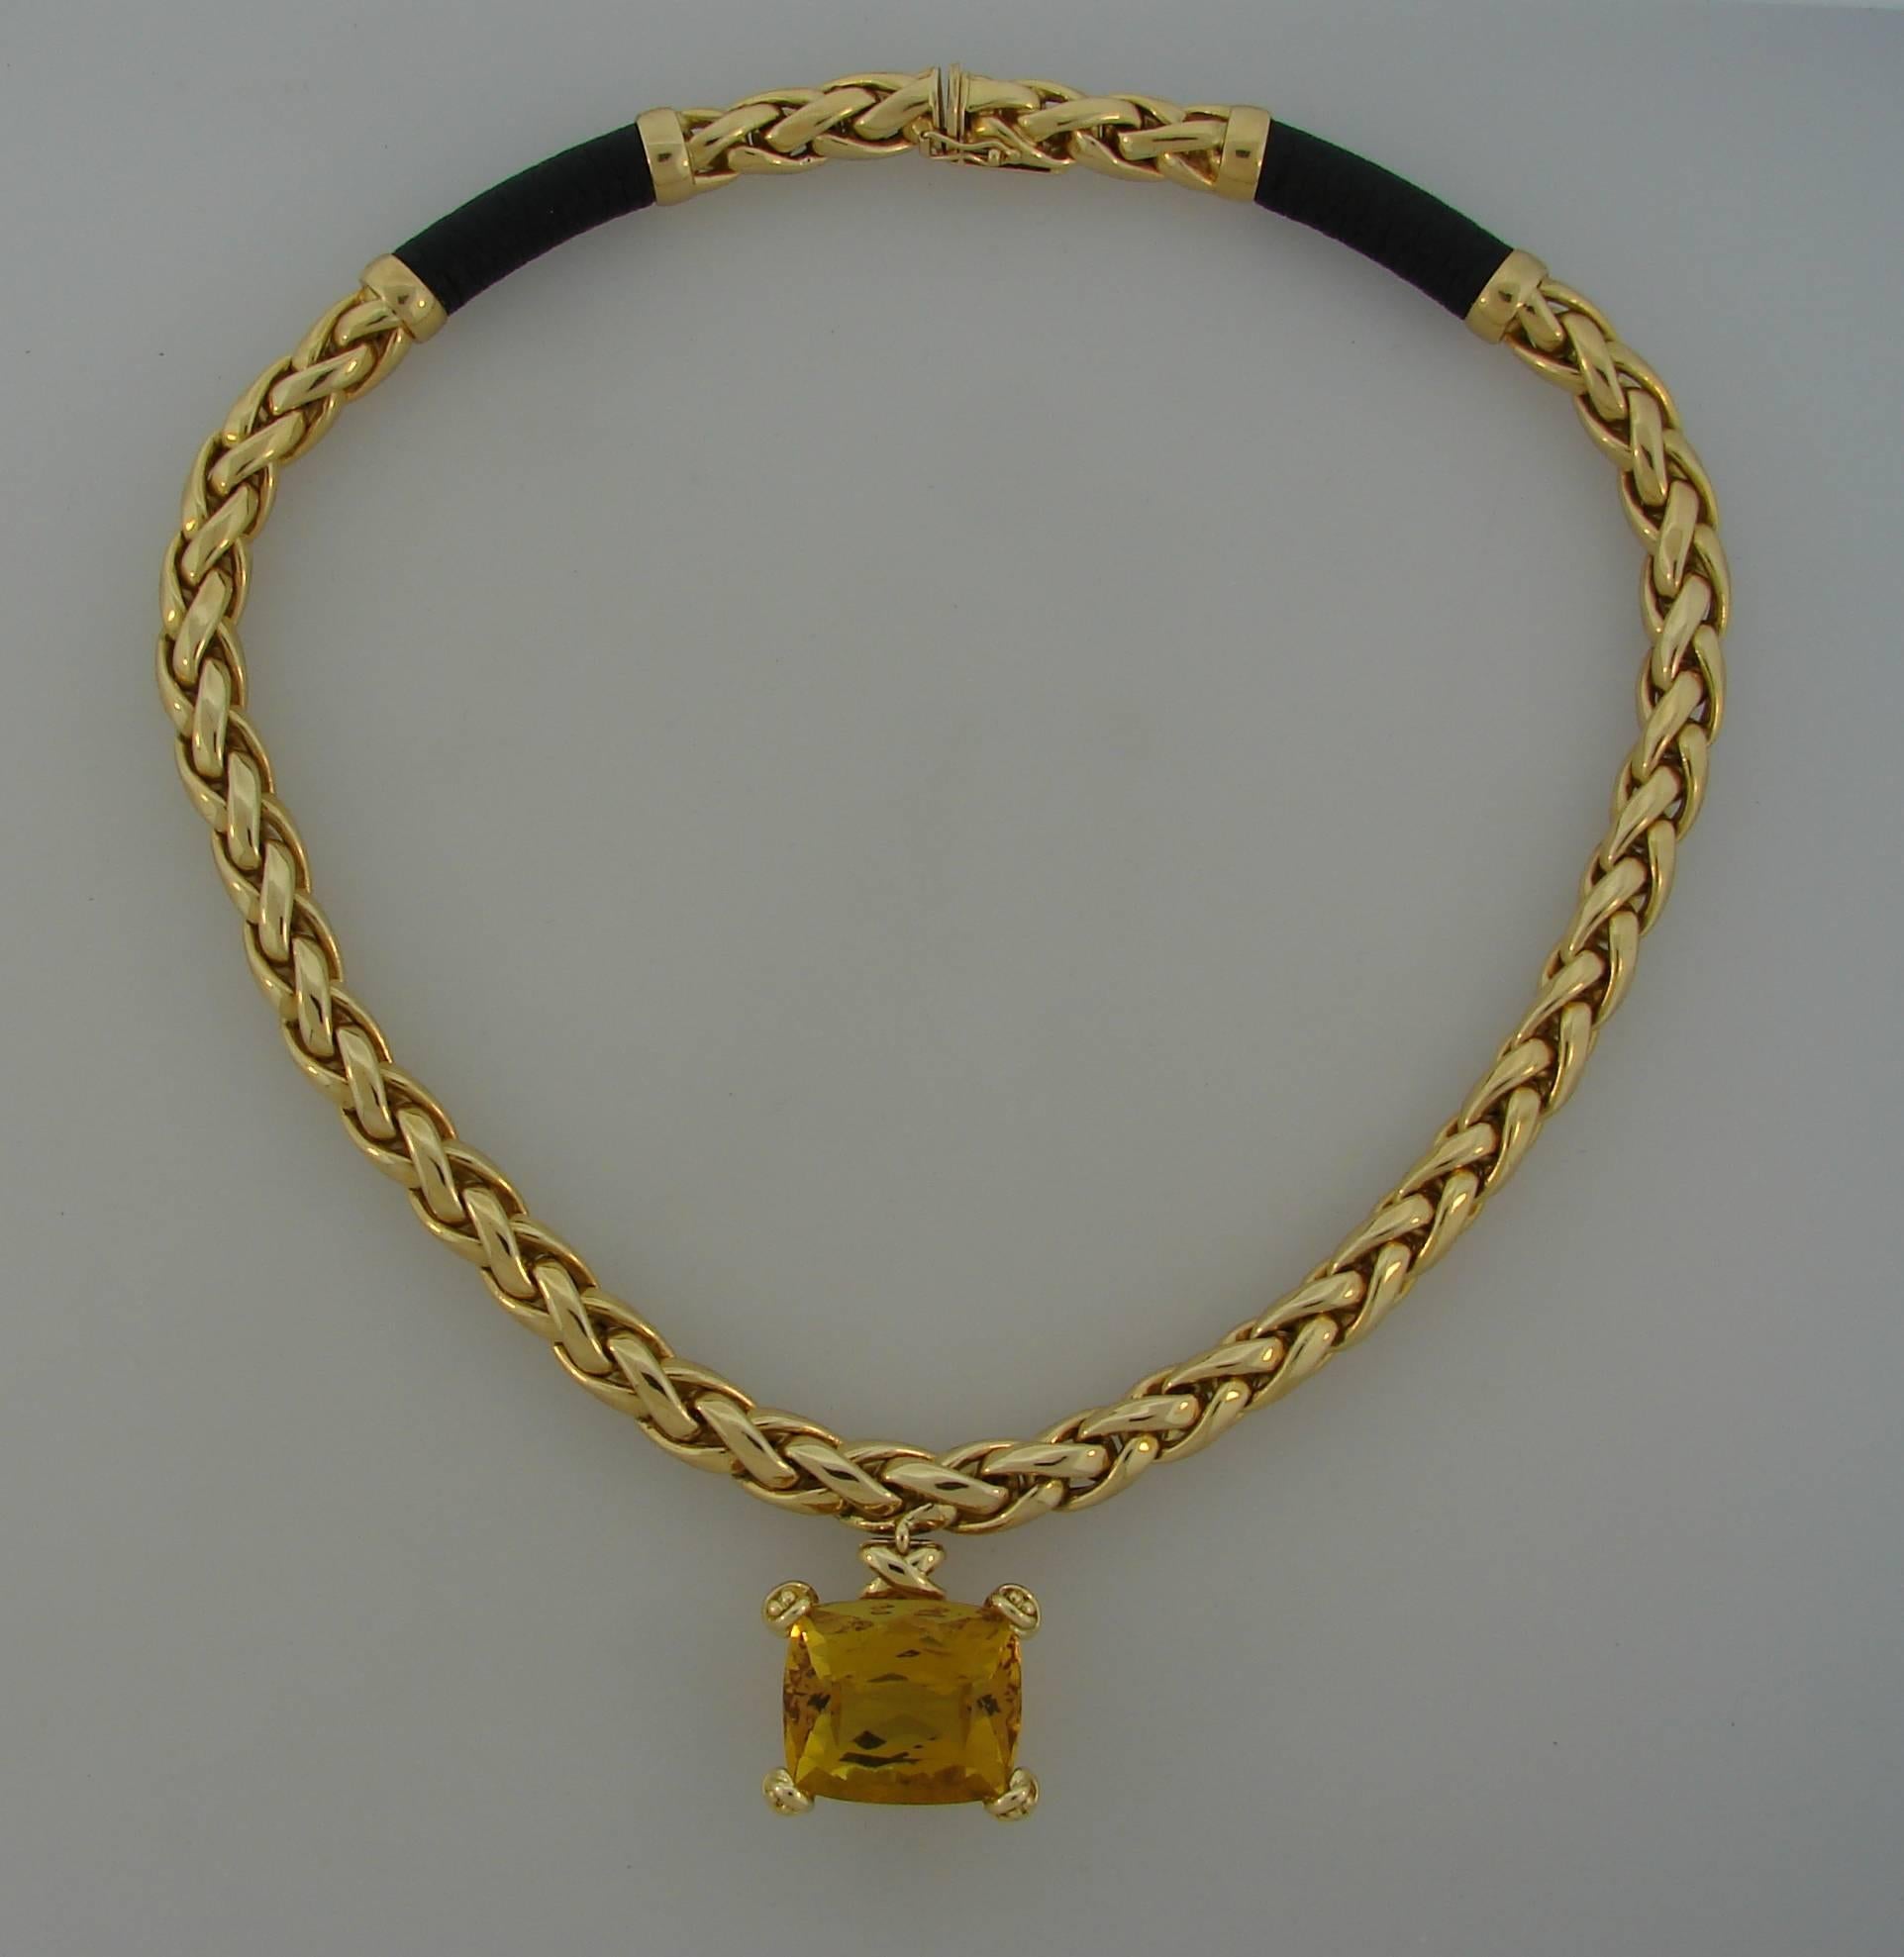 Bold, colorful, elegant necklace created in Italy for Tiffany & Co. by Paloma Picasso. Features a beautiful sunshine citrine that is cut in cushion shape. Yellow gold woven necklace has two black leather insertions which together with impressive